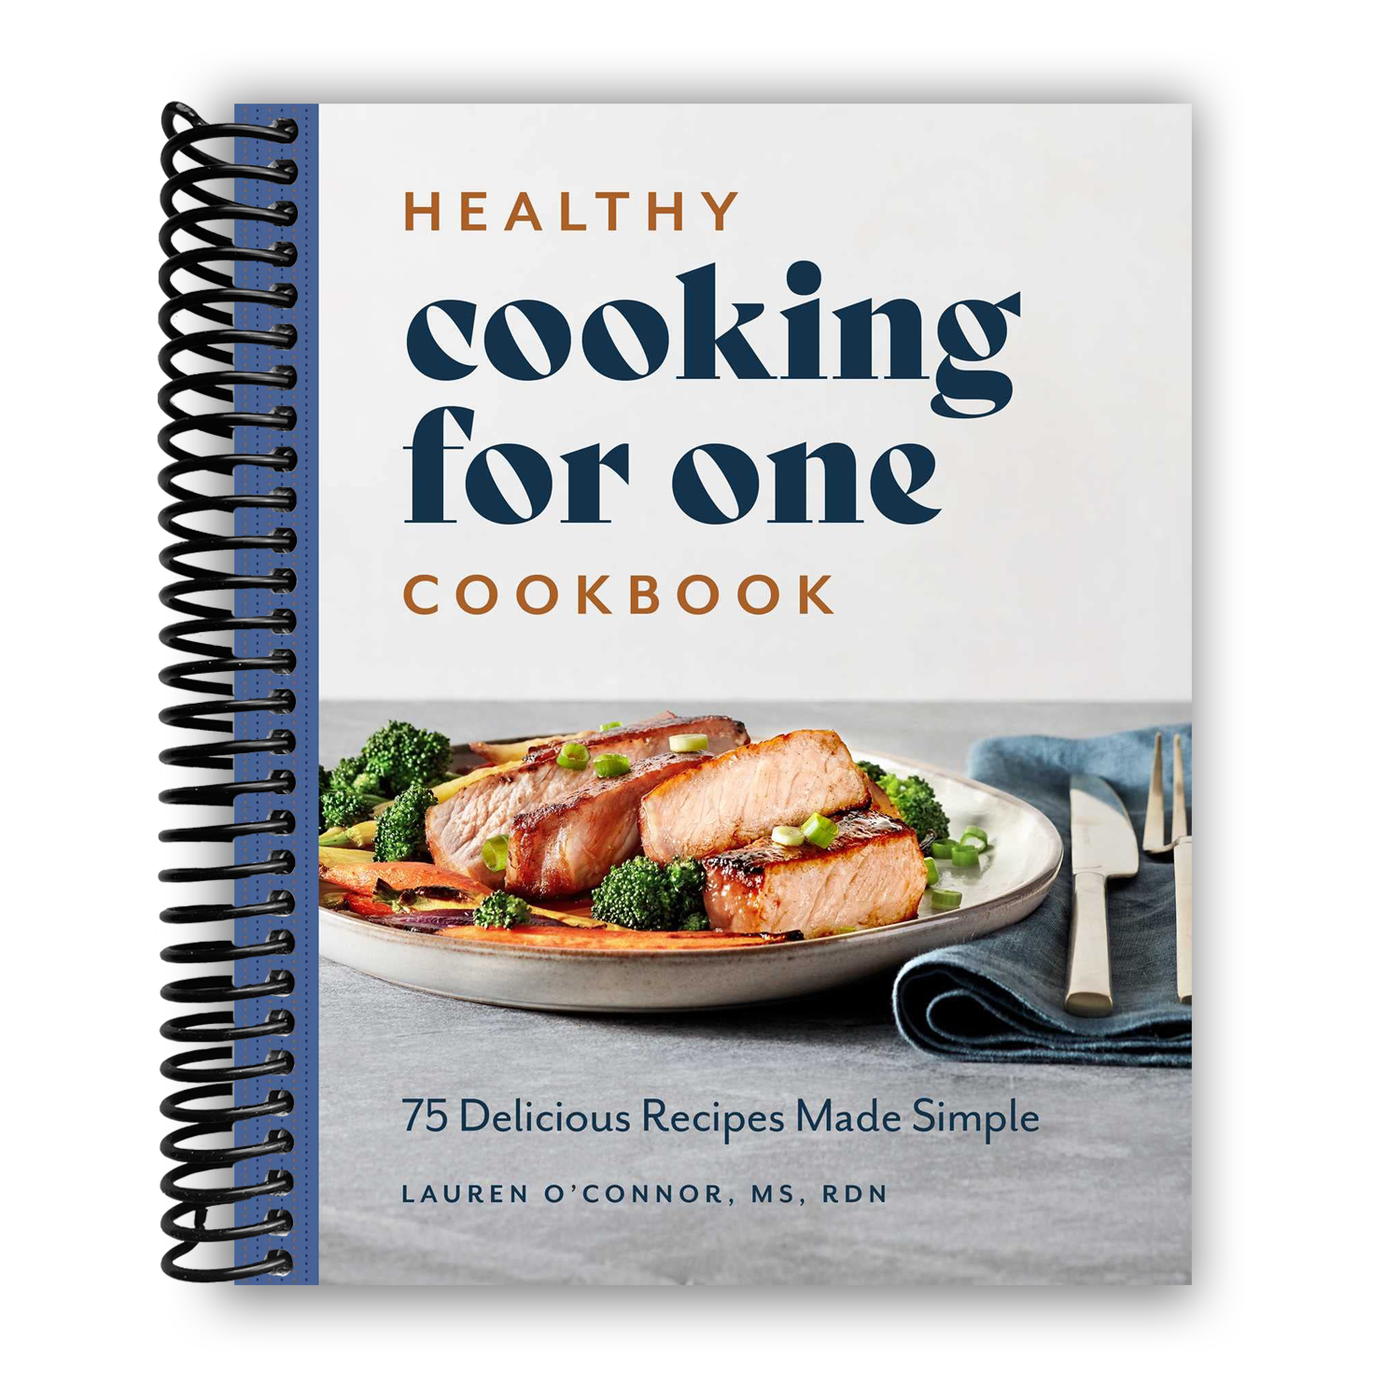 Healthy Cooking for One Cookbook: 75 Delicious Recipes Made Simple (Spiral Bound)